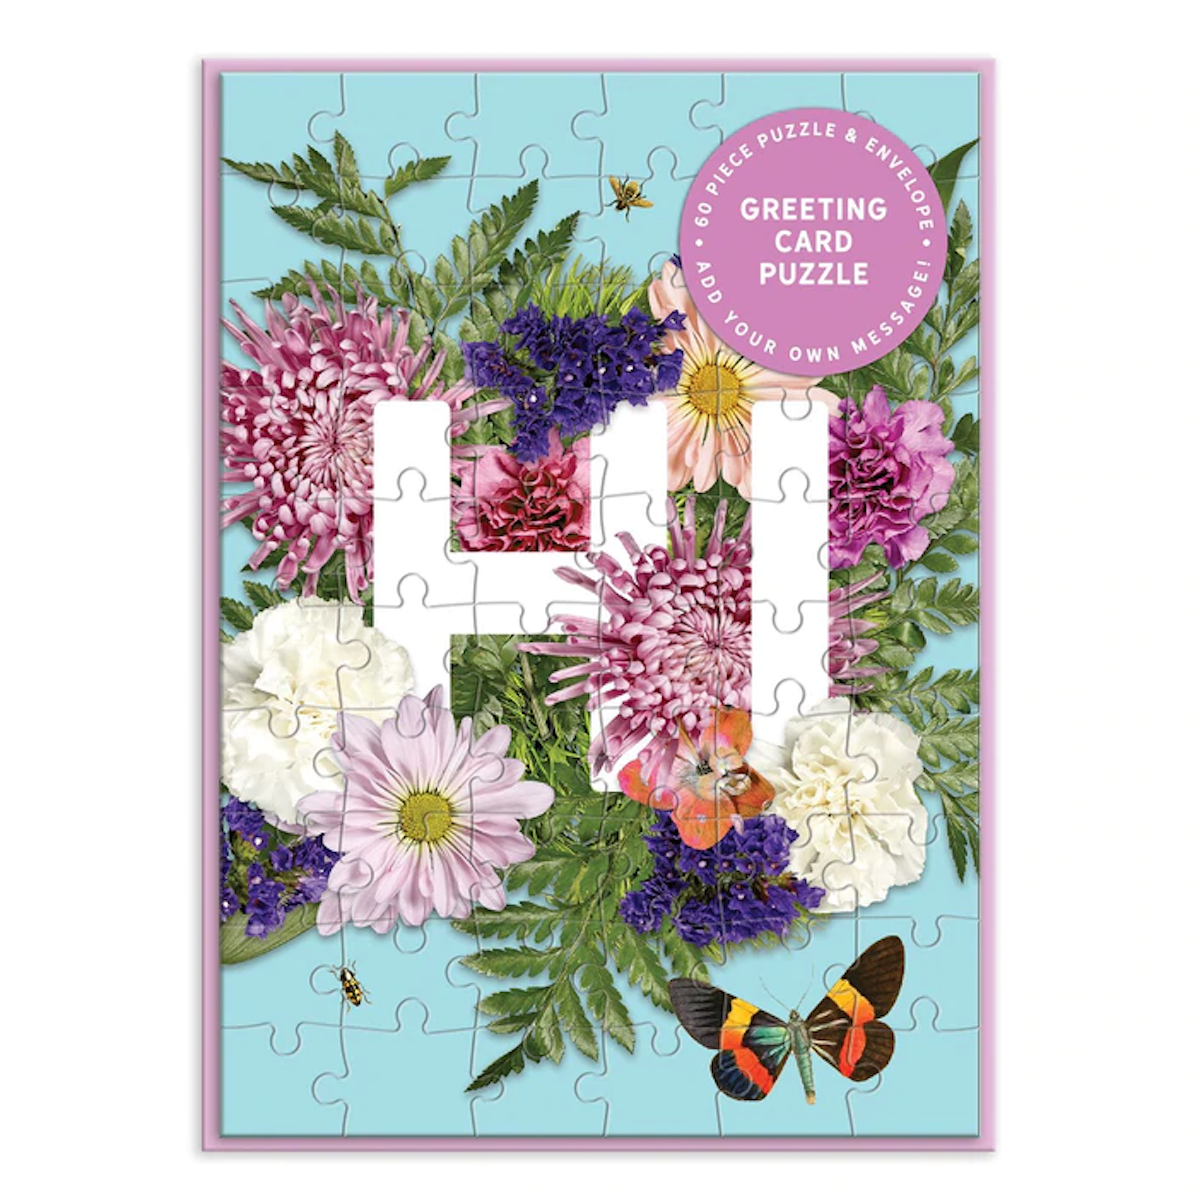 Say it with Flowers Hi Greeting Card & Puzzle 60pcs